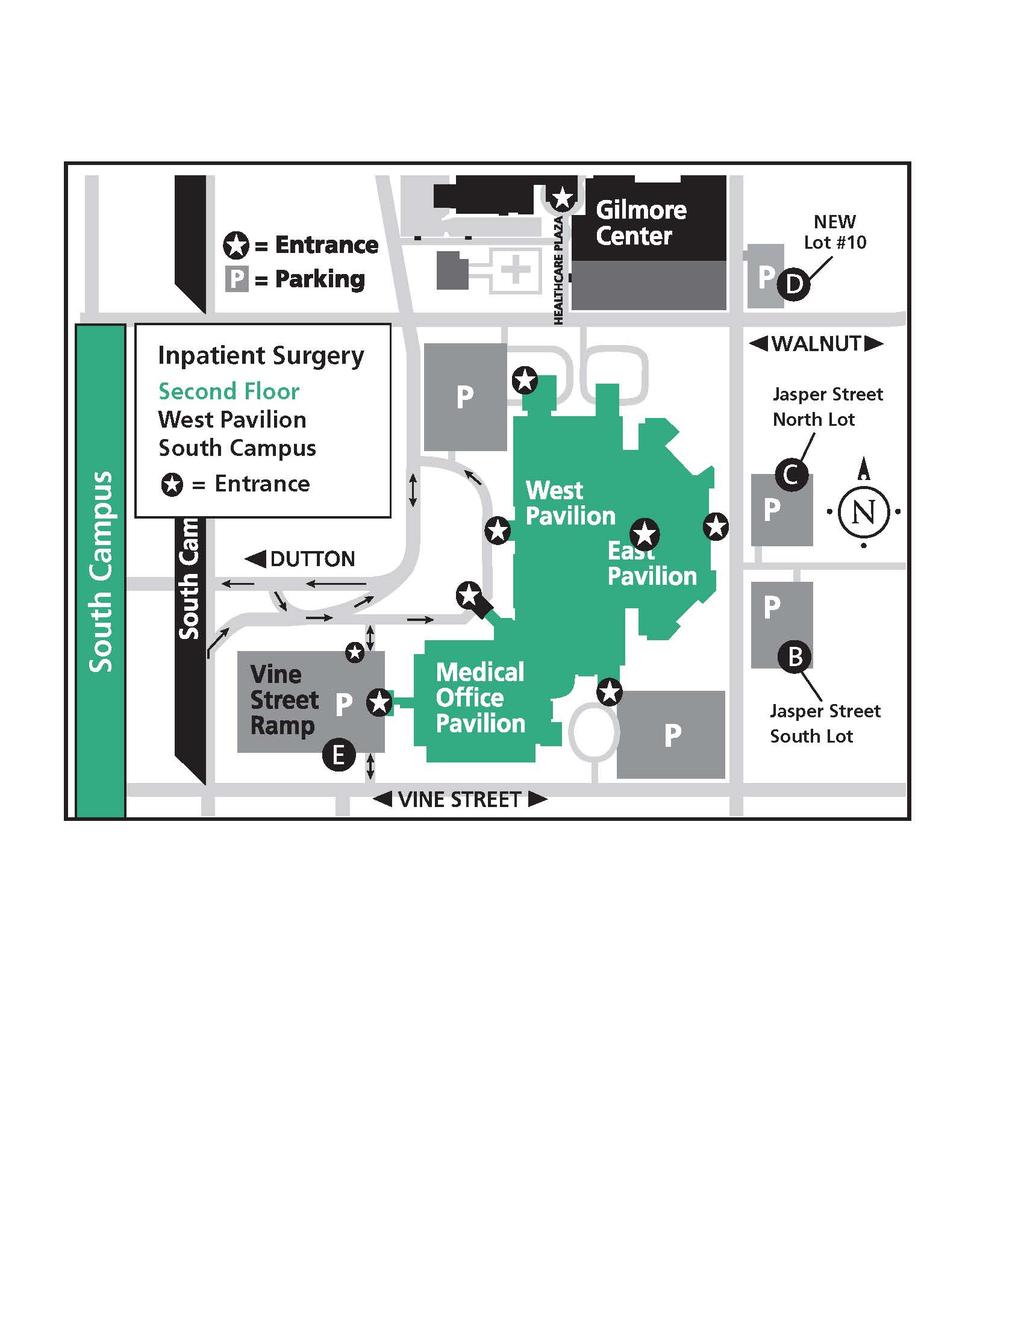 Inpatient Surgery Parking Park in any of the three lots on Jasper Street across from the East entrance: B Jasper Street South Lot, C Jasper Street North Lot, D Lot #10 Additional Parking Parking is